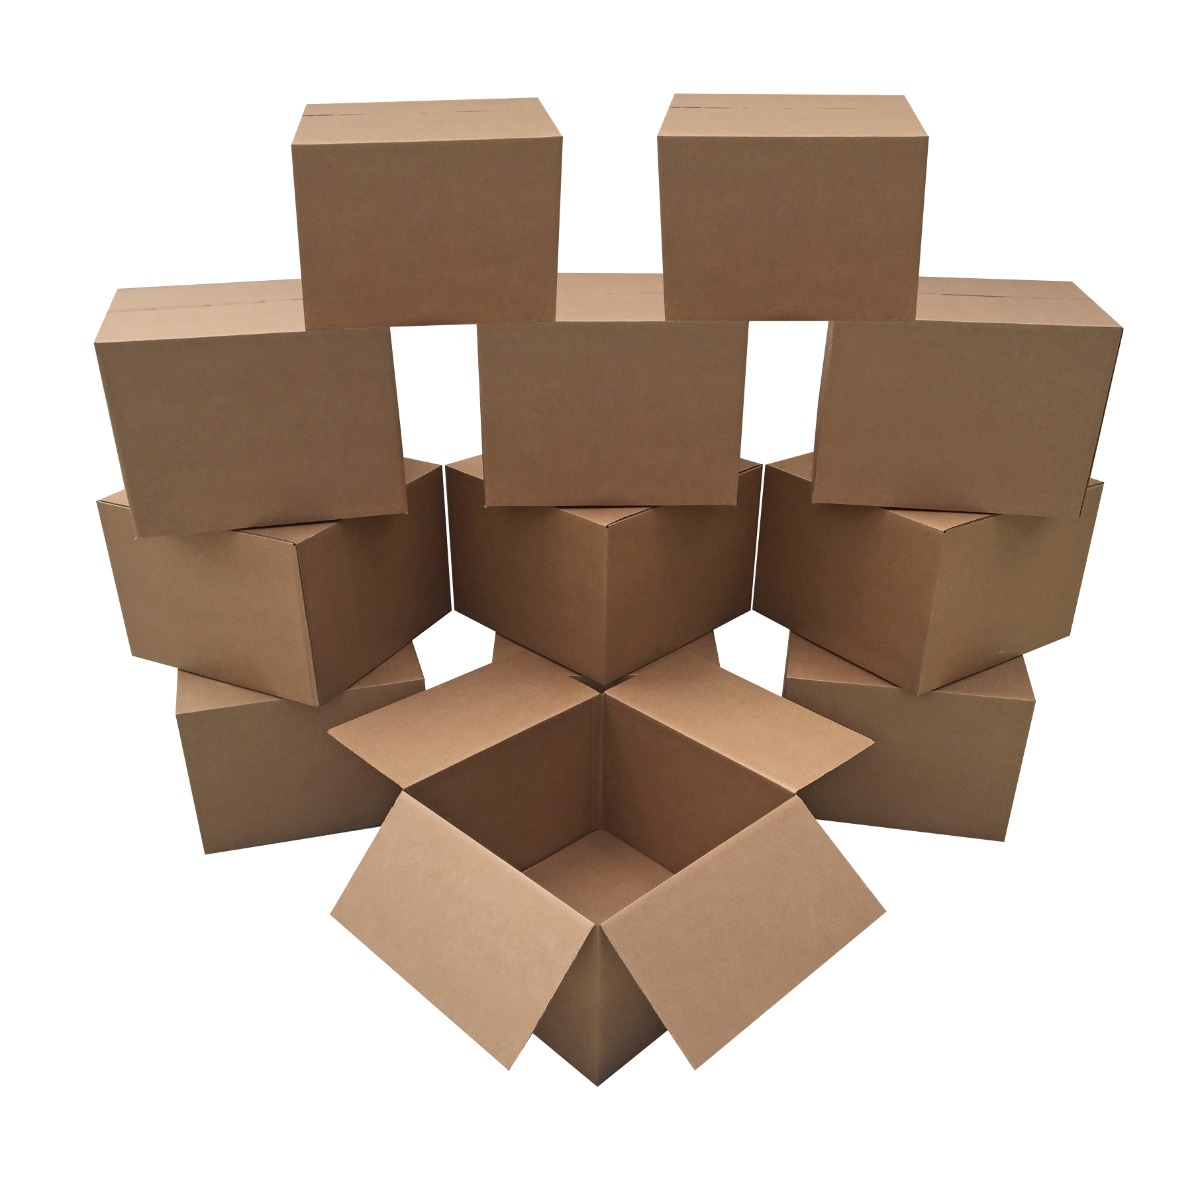 uBoxes Glass Cell Divider Box Compartments & Foam Pouches for